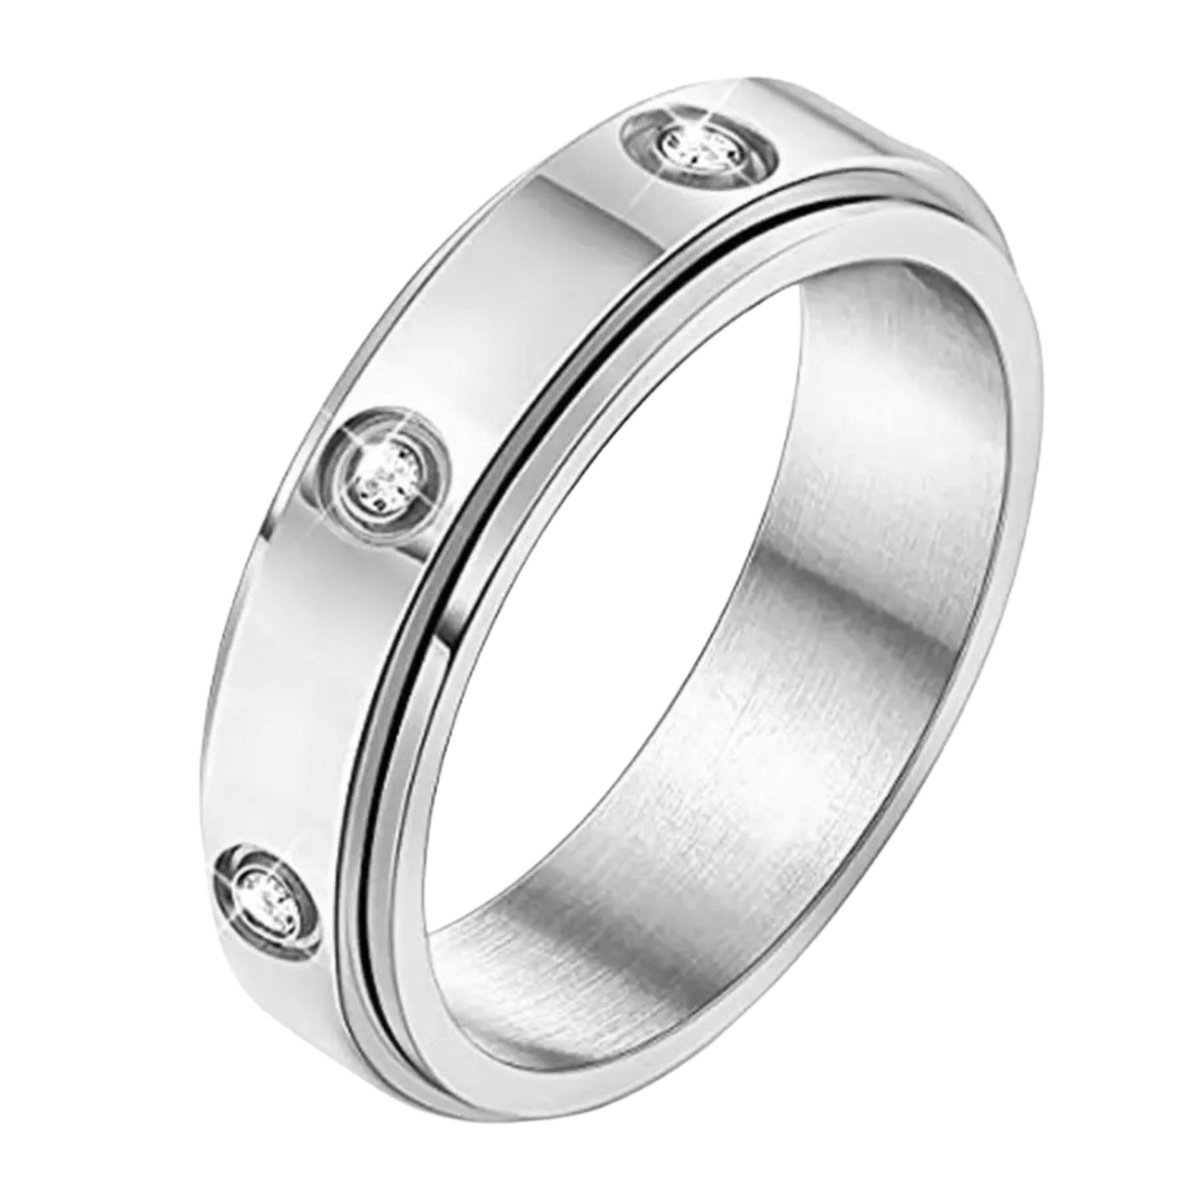 Anxiety Ring - (Zirkonia) - Stress Ring - Fidget Ring - Anxiety Ring For Finger - Draaibare Ring - Spinning Ring - Zilver - (21.25 mm / maat 67)